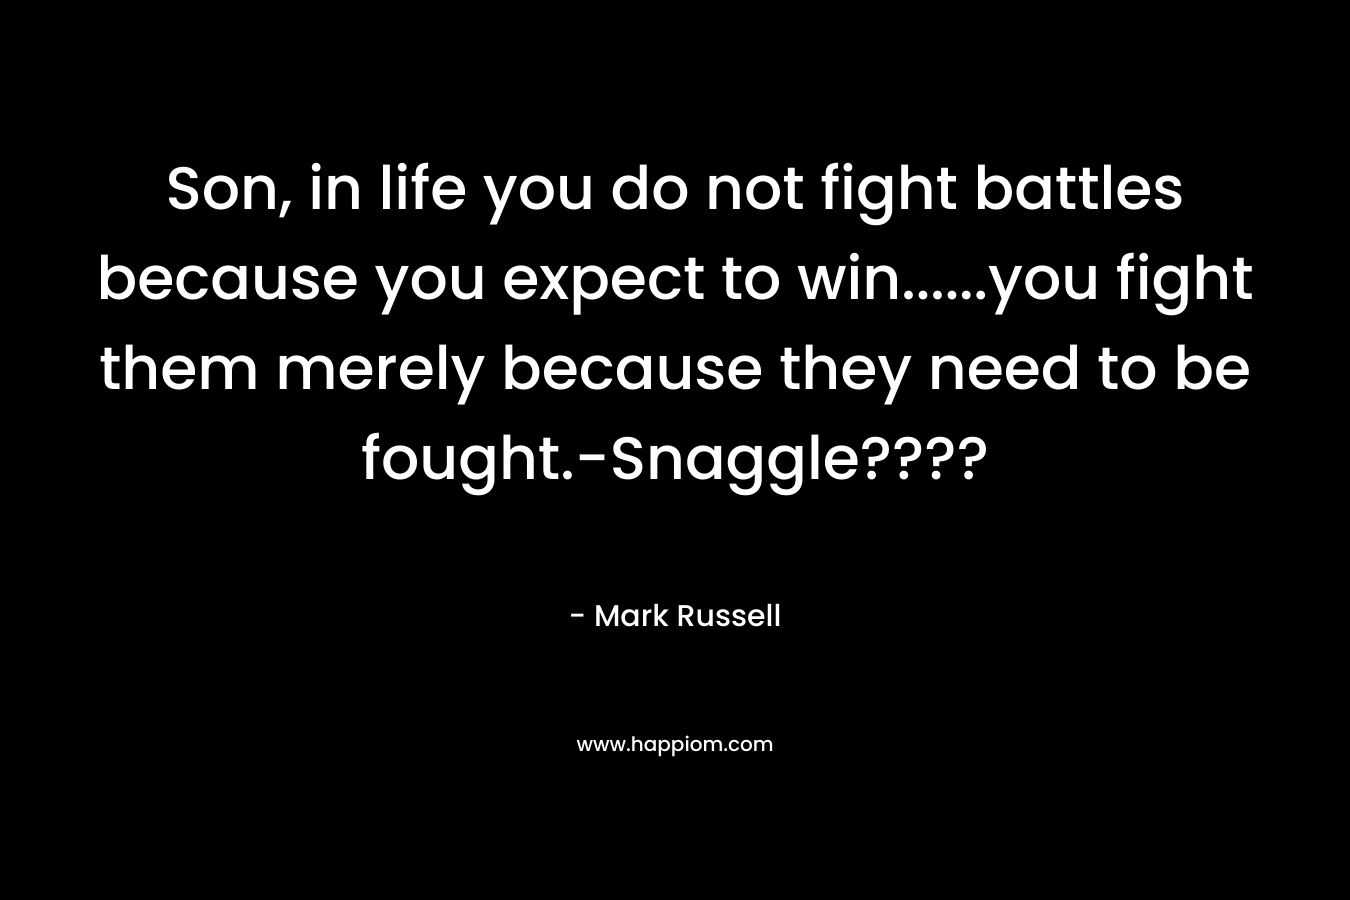 Son, in life you do not fight battles because you expect to win......you fight them merely because they need to be fought.-Snaggle????